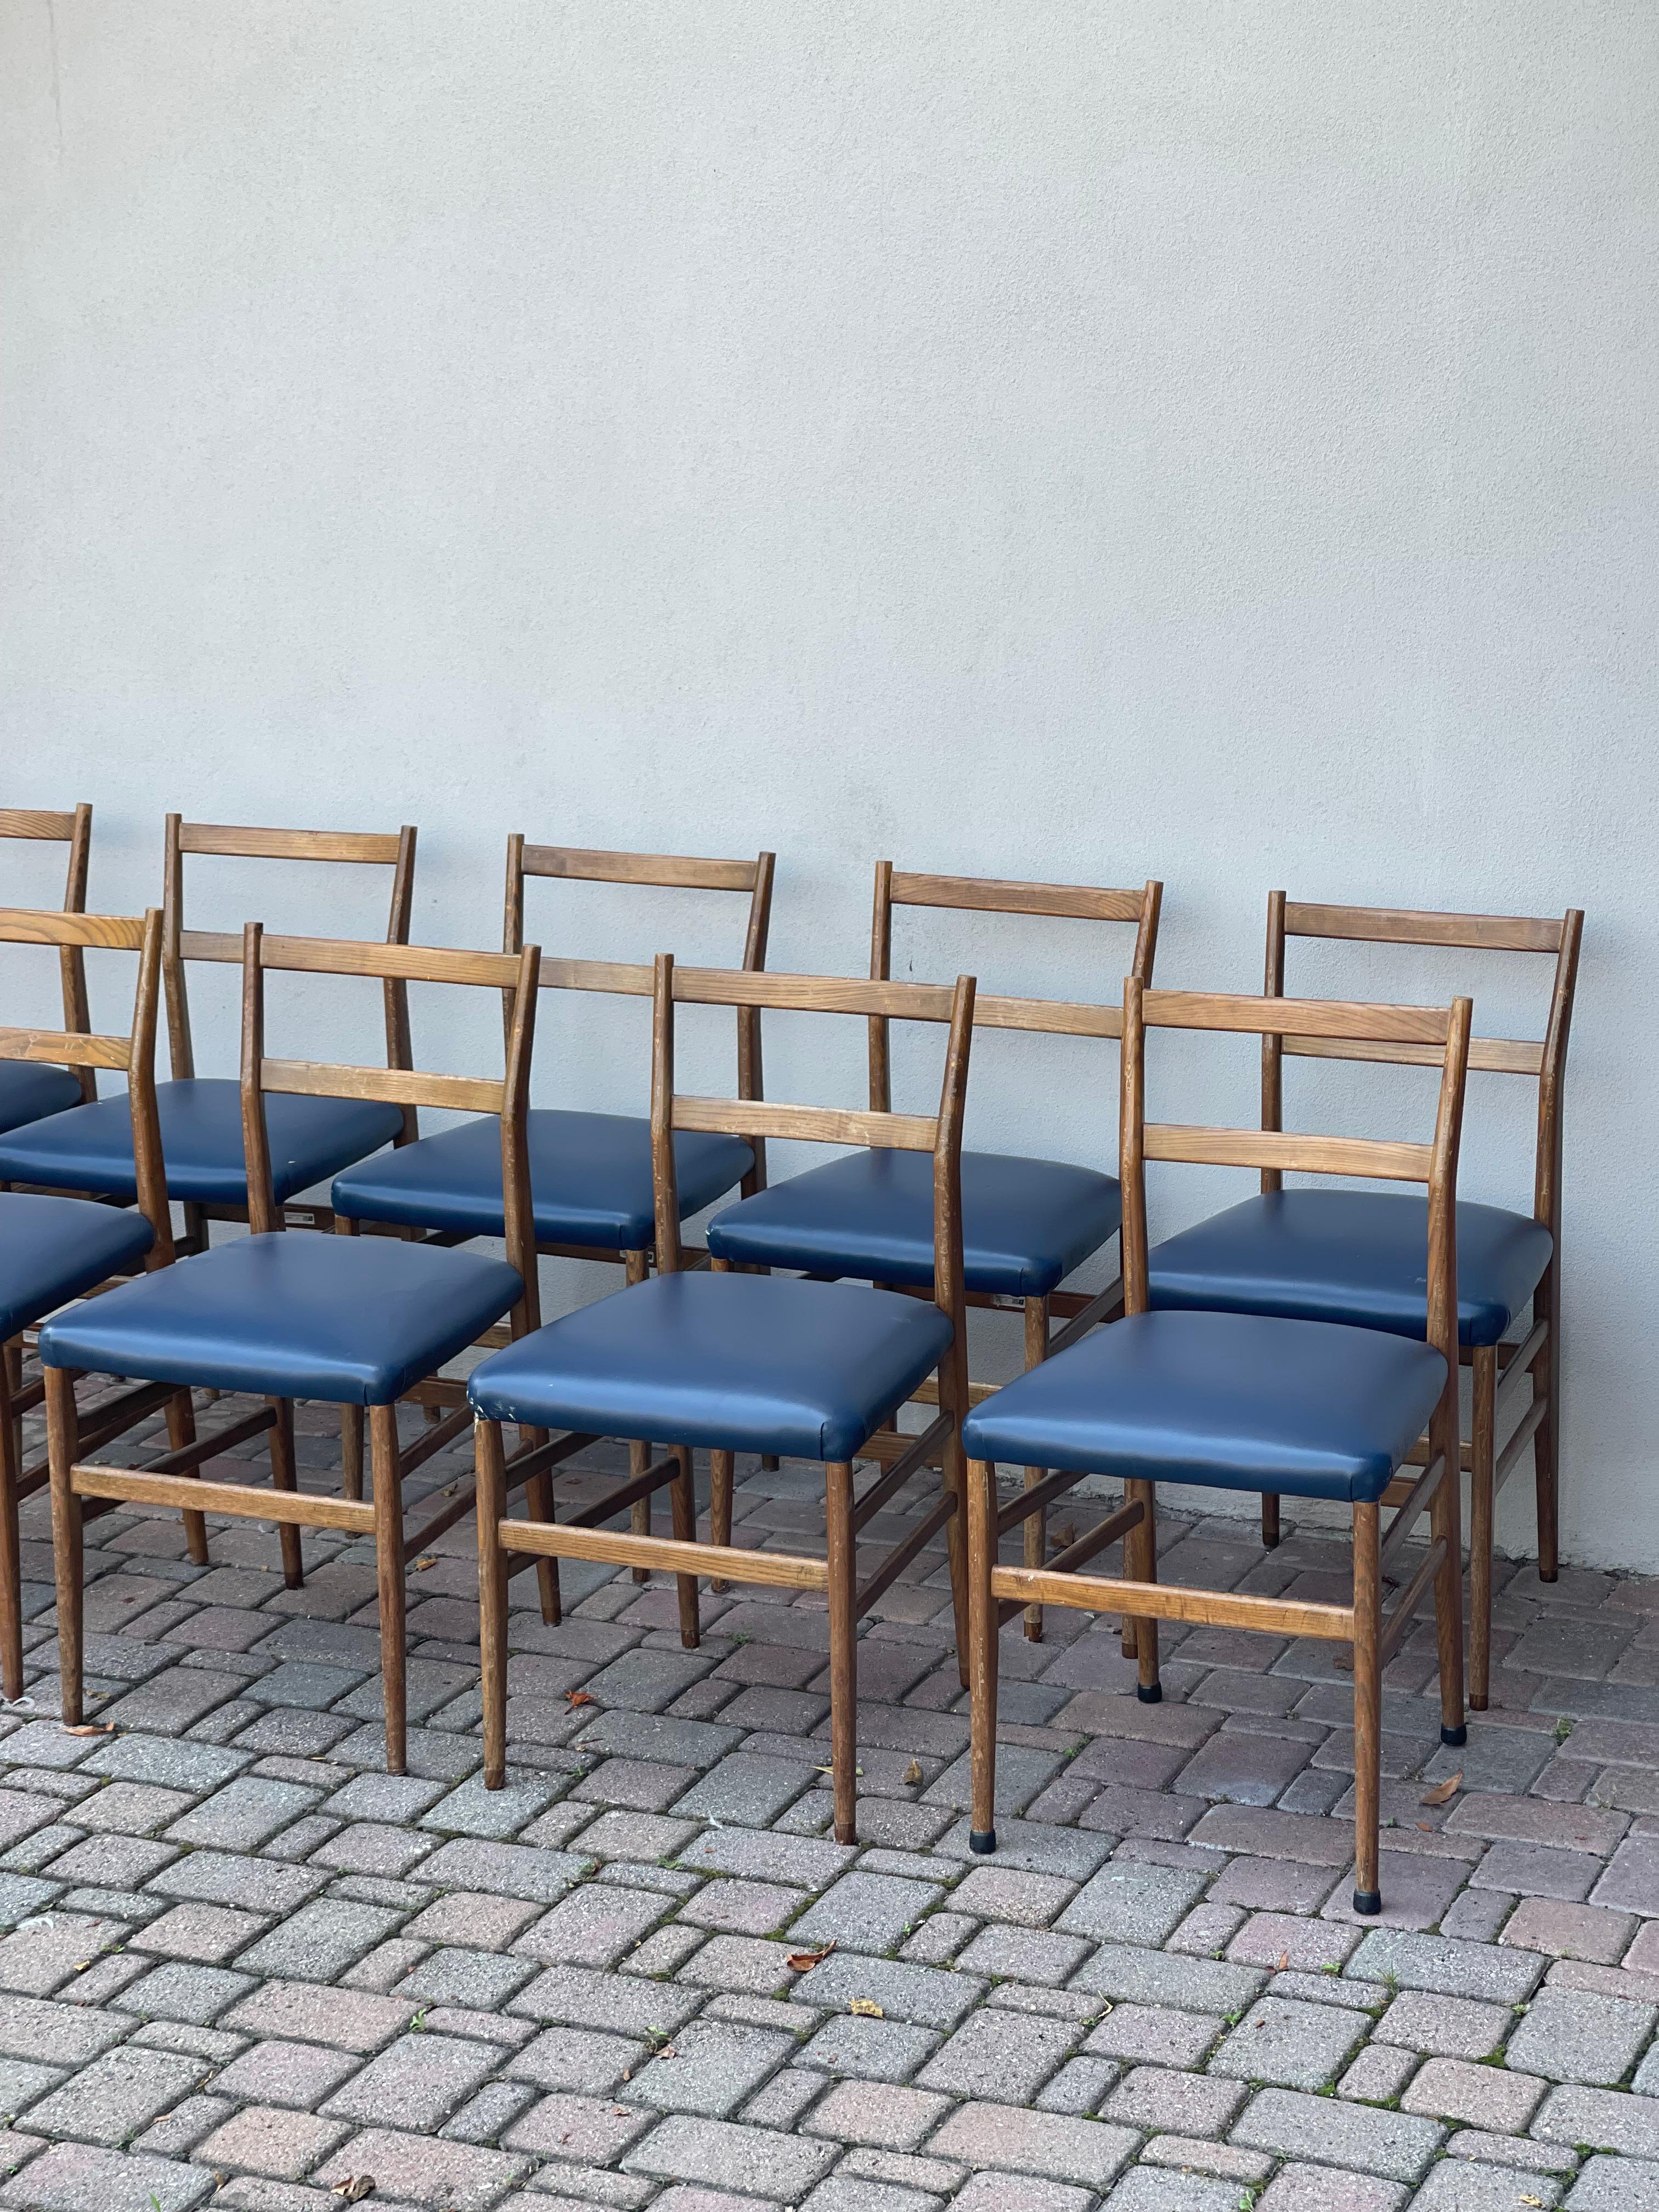 14 Leggera chairs by Gio Ponti - Wood And Blue Leather - Original Conditions  For Sale 2